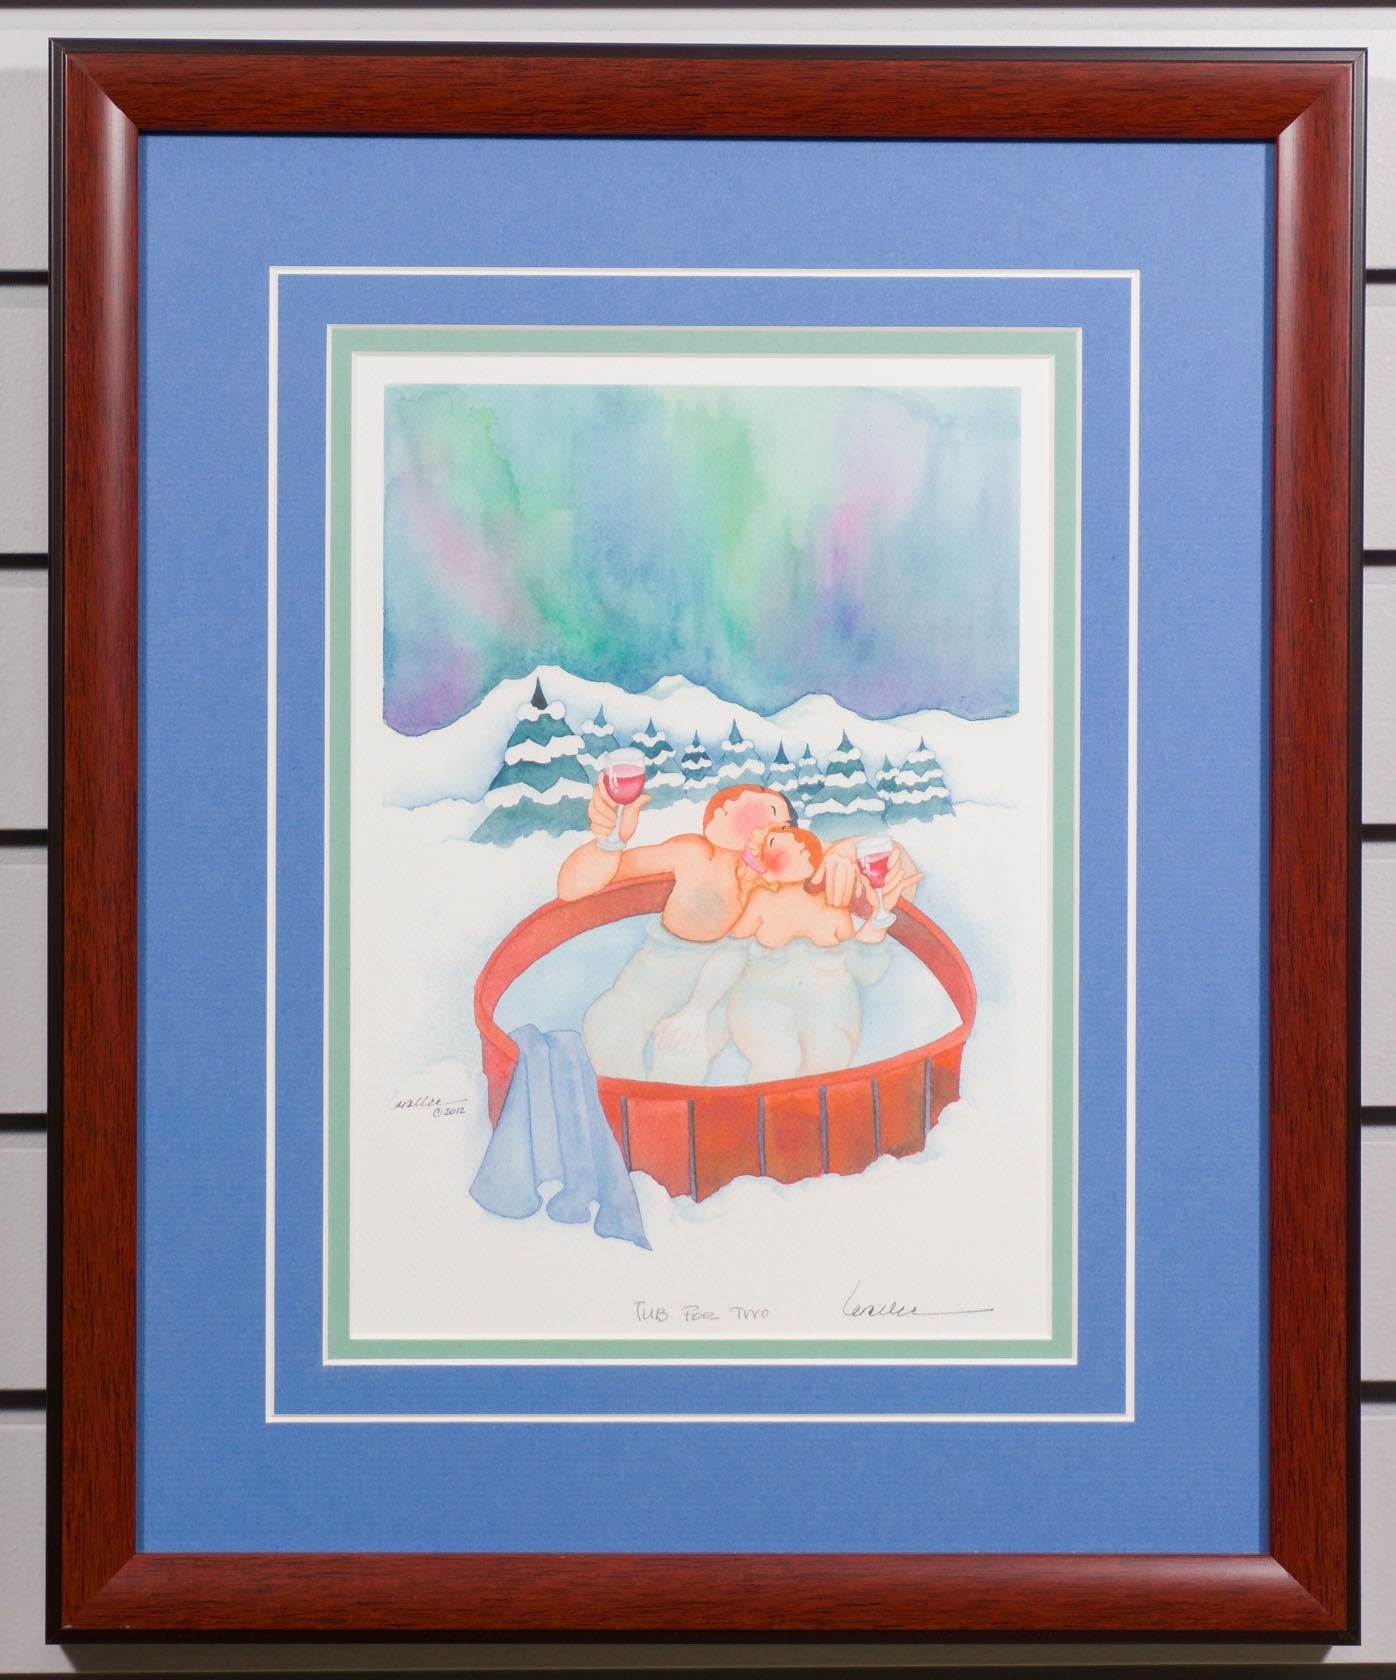 TUB FOR TWO (FRAMED) BY BARBARA LAVALLEE